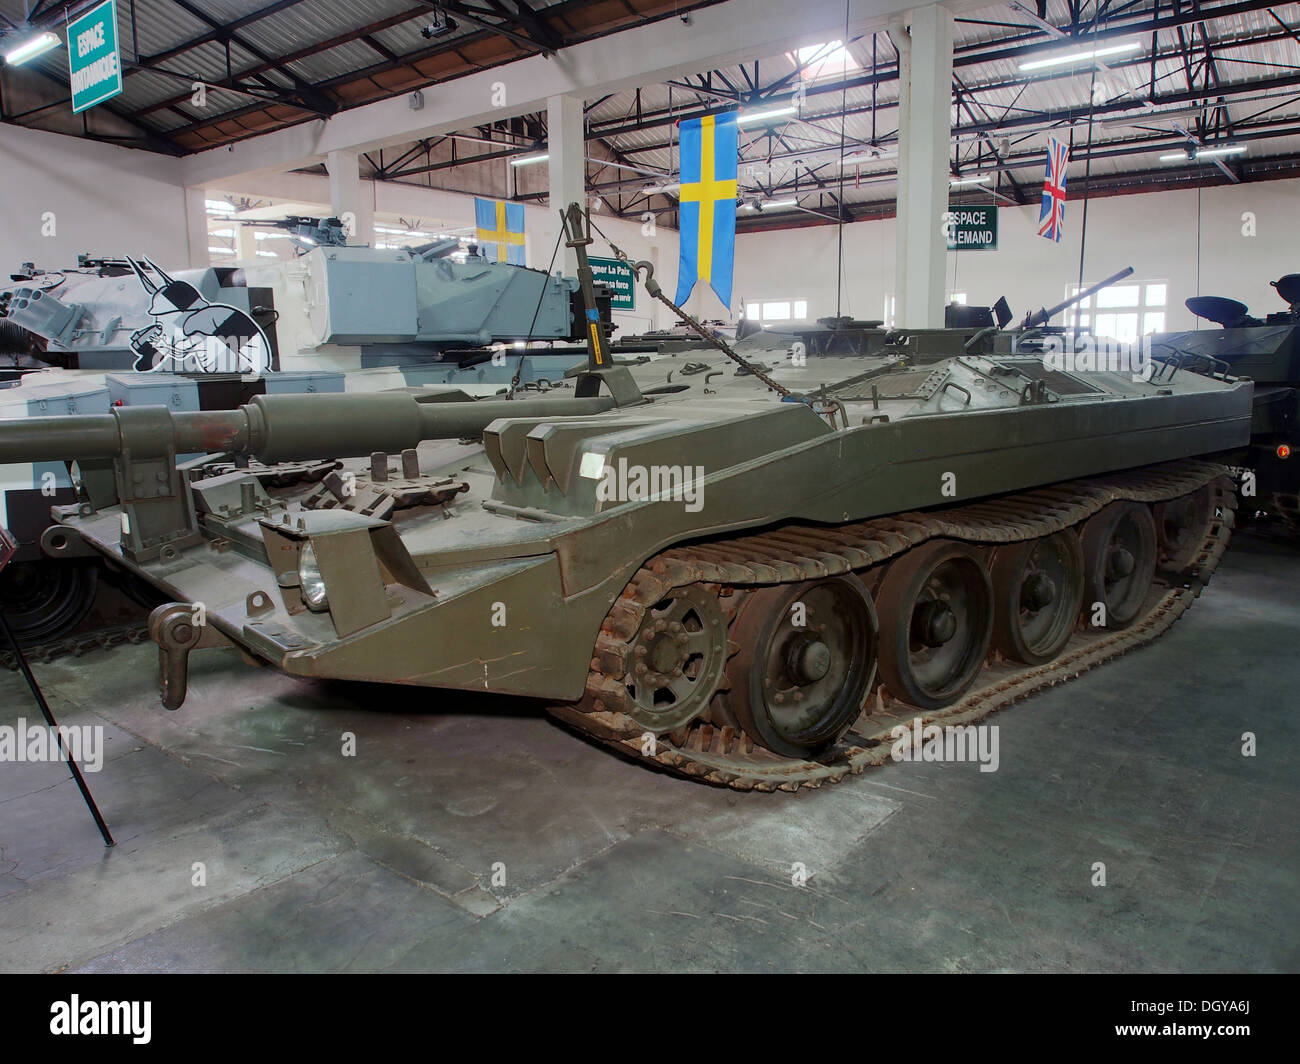 Stridsvagn 103 in the tank museum, Saumur, pic1 Stock Photo